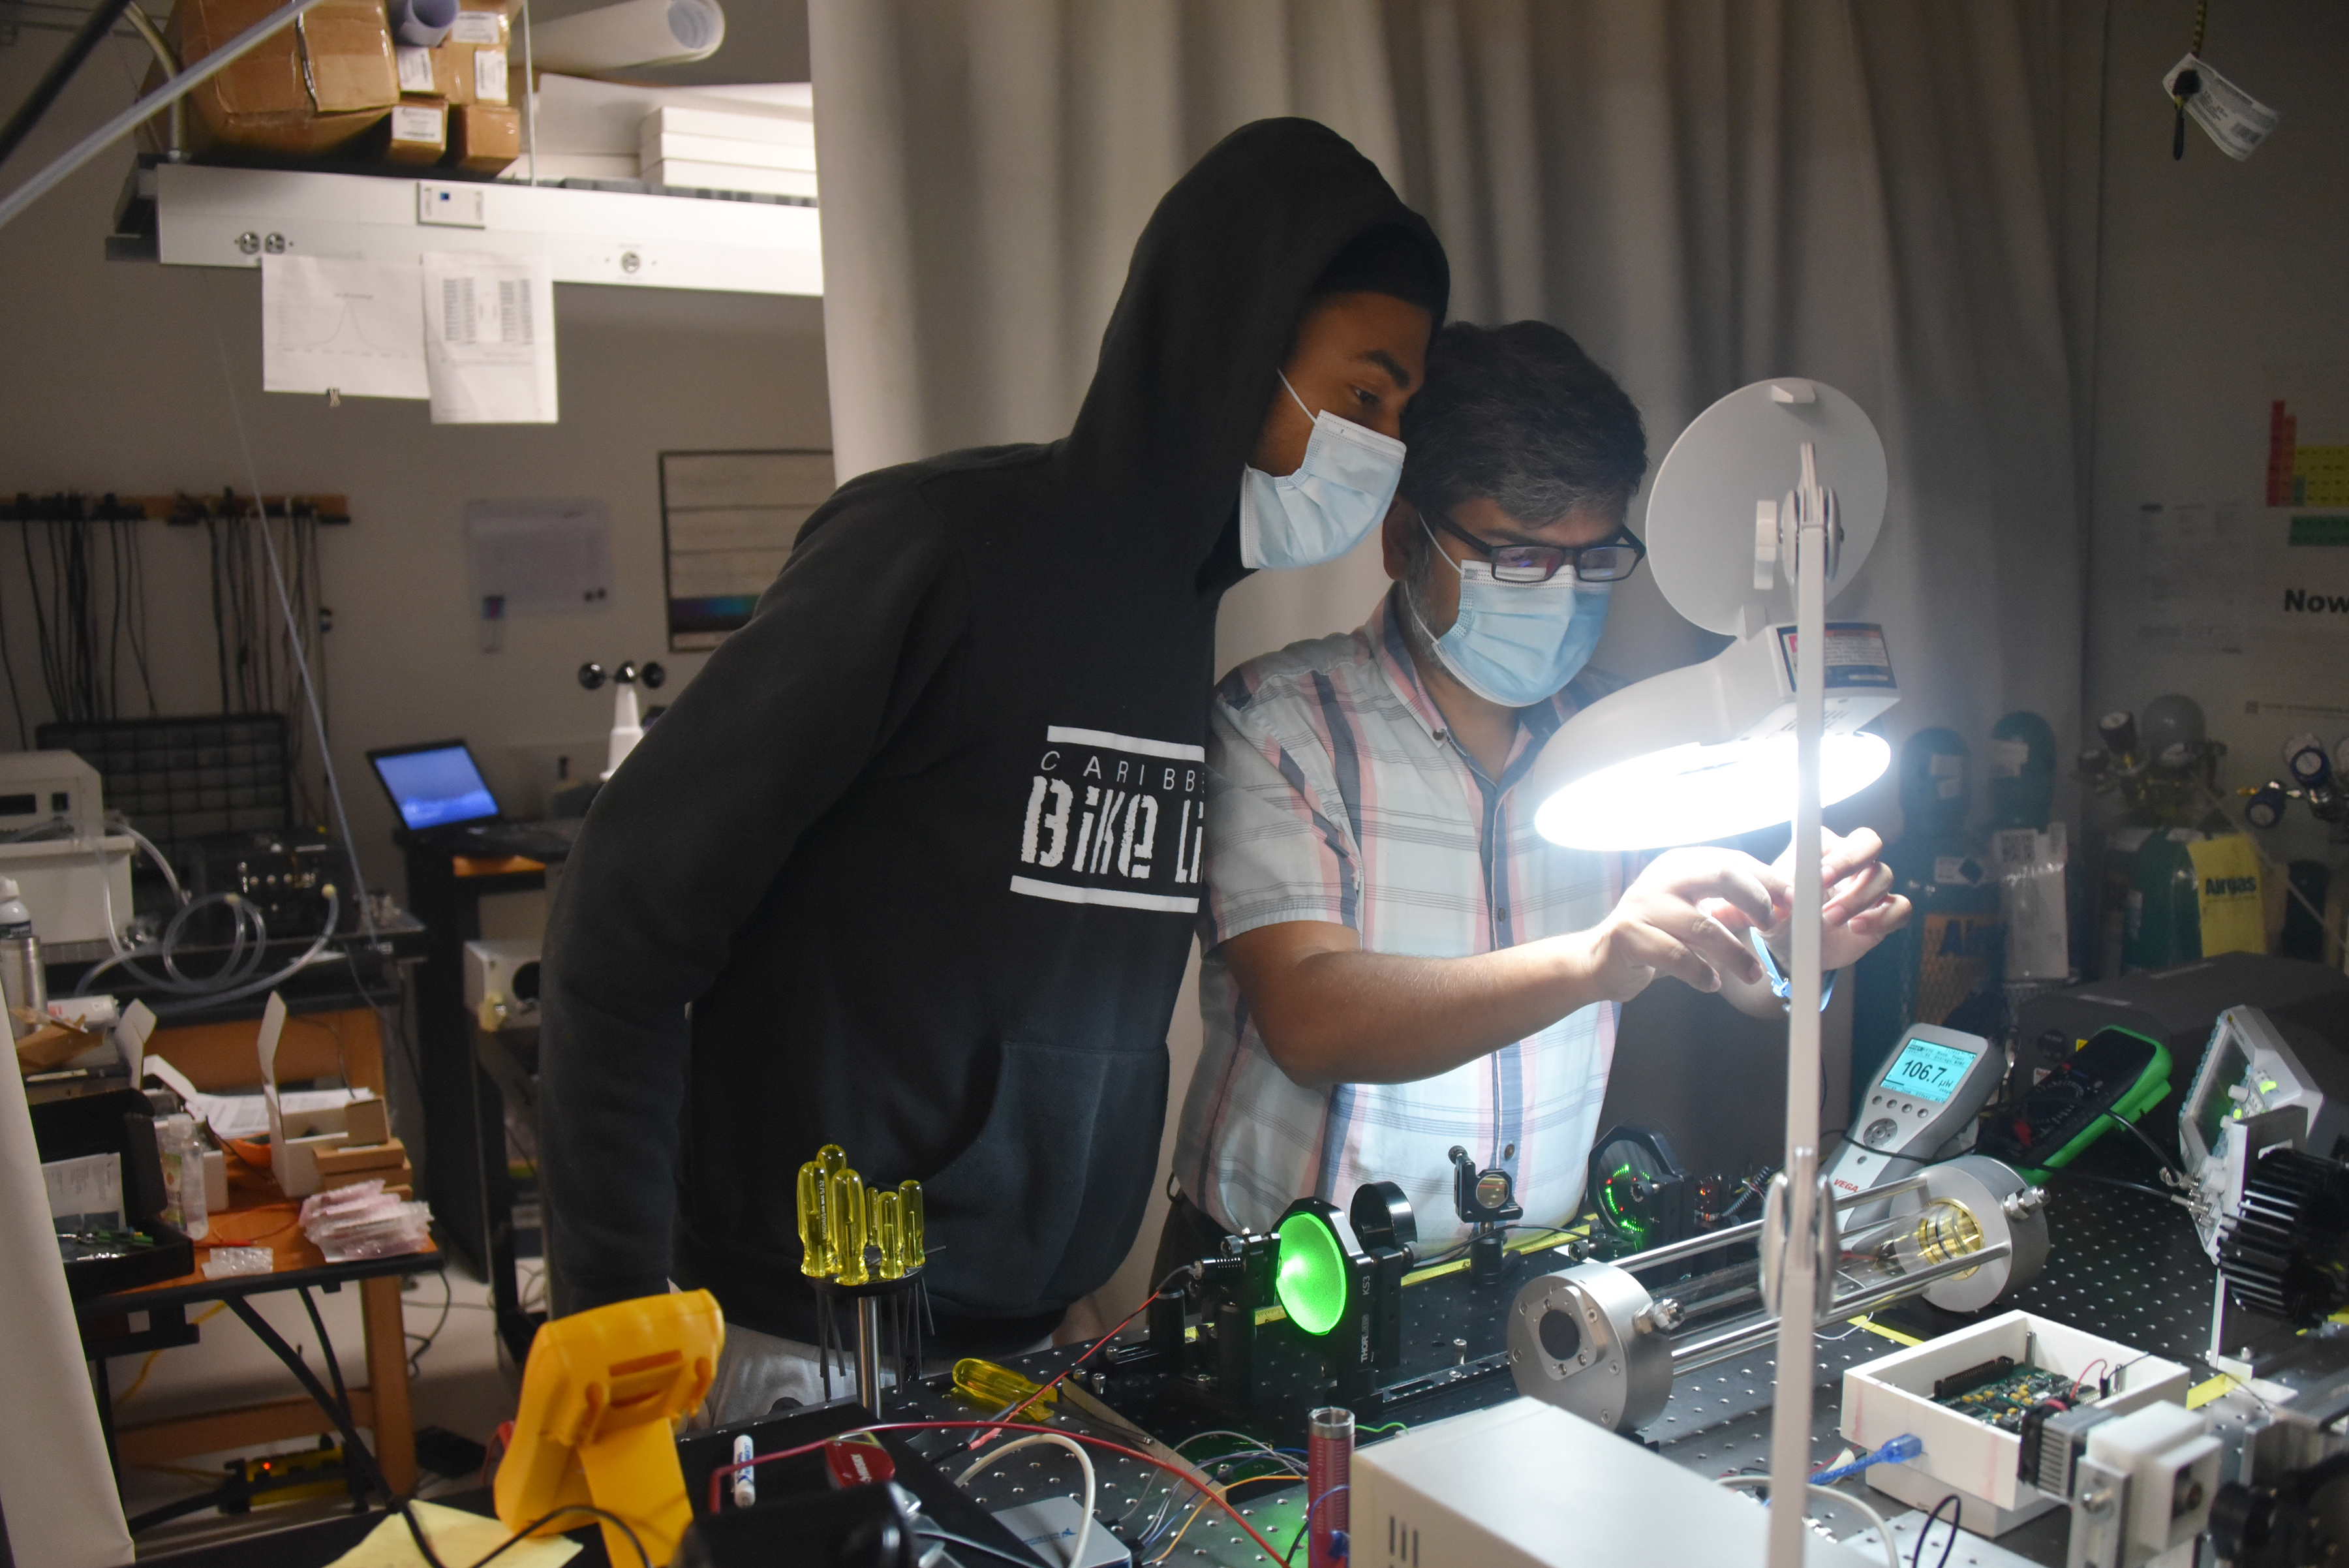 (L-r) Al R. Alexis, a graduate student in Optics, and Dr. Mohammed Khan, Associate Professor of Optics, work in the labs of the OSCAR Building, which will be the site of isotopic signature sensing research recently funded by the Department of Defense. 